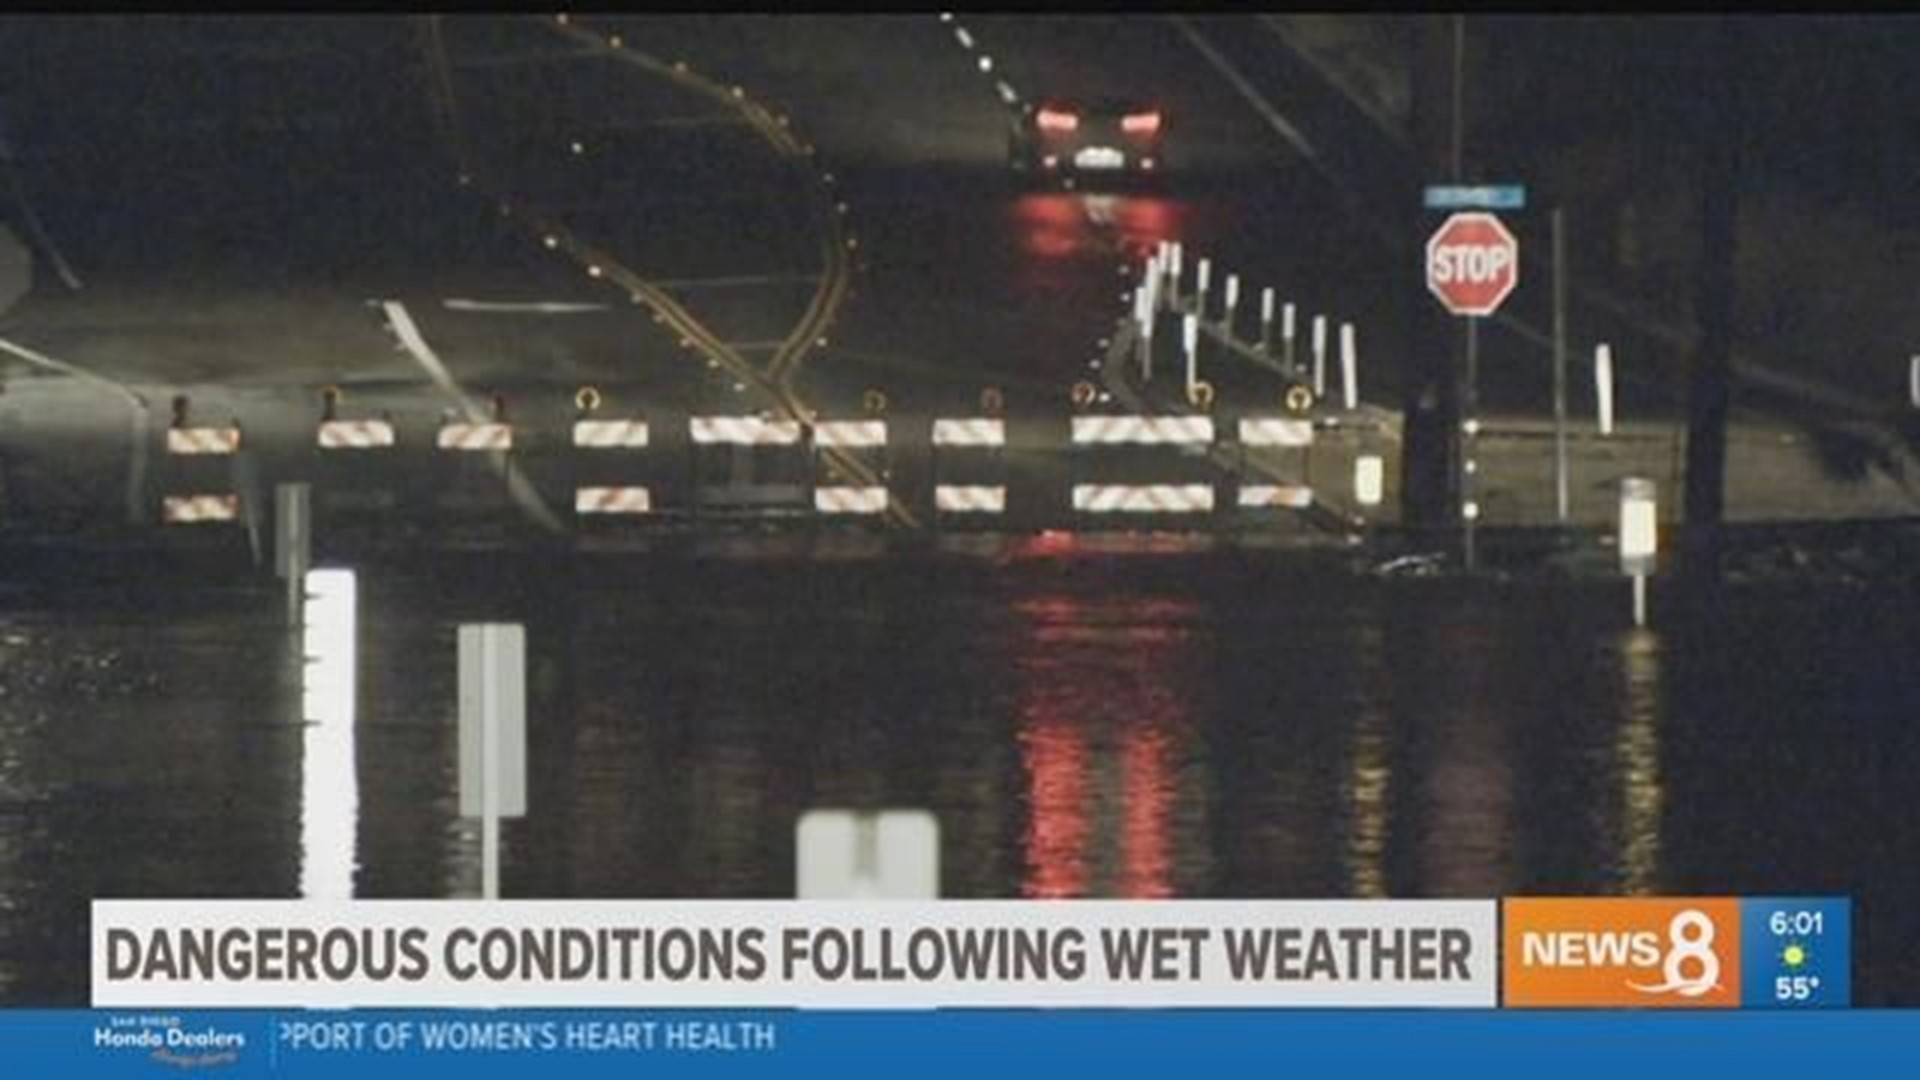 Dangerous conditions following wet weather in San Diego | cbs8.com